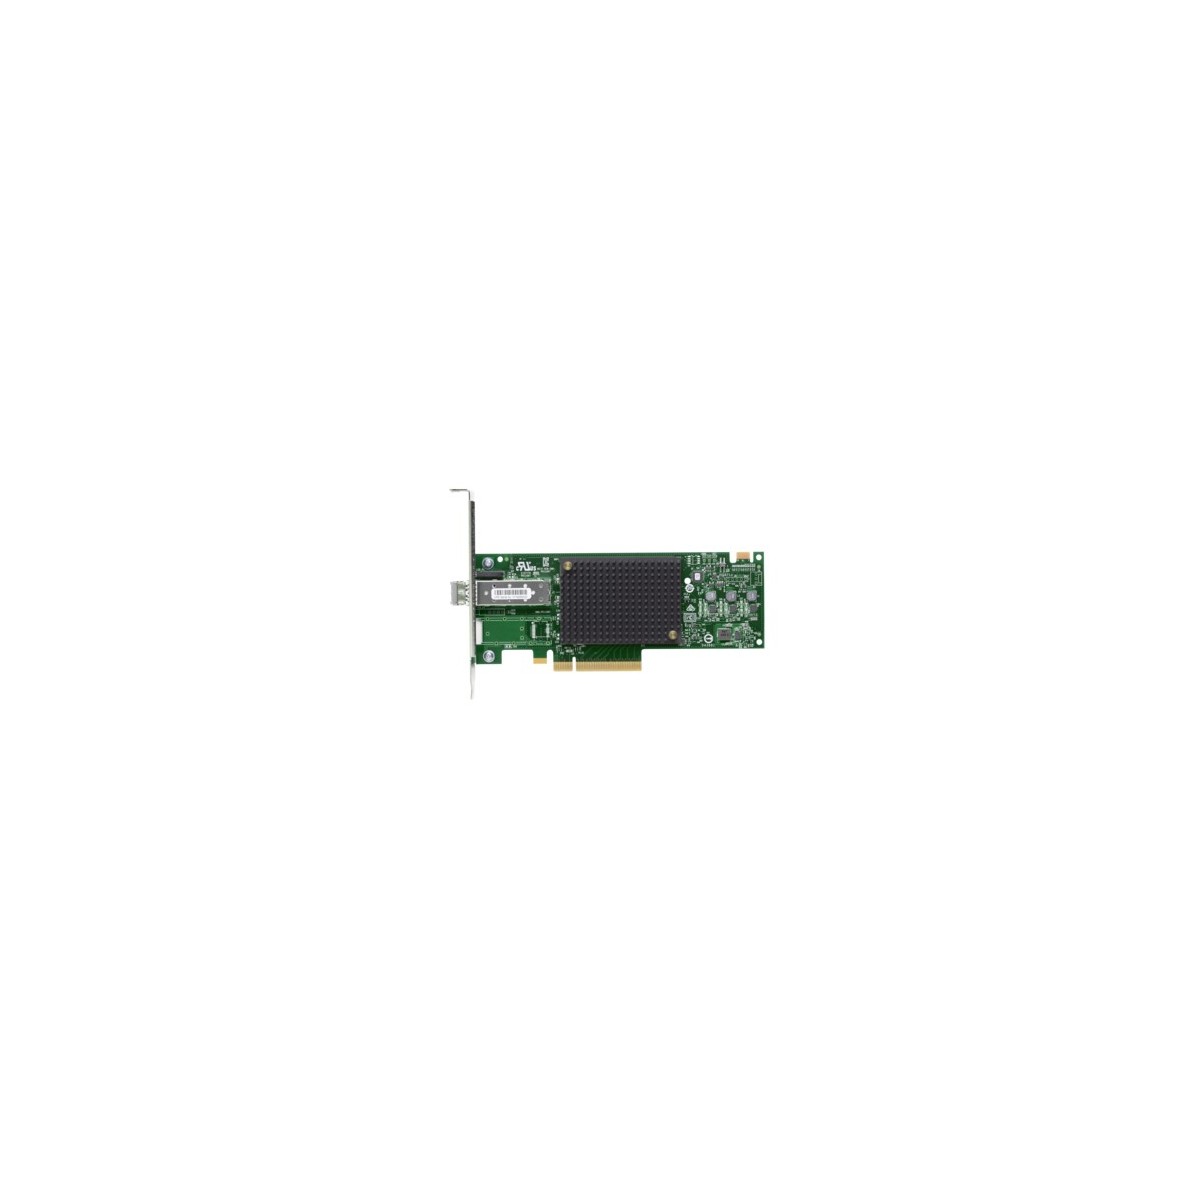 HPE StoreFabric SN1200E Fibre Channel Host Bus Adapter - Plug-in Card - PCI Express - 1 x Total Fibre Channel Port(s) - 16 Gbit/